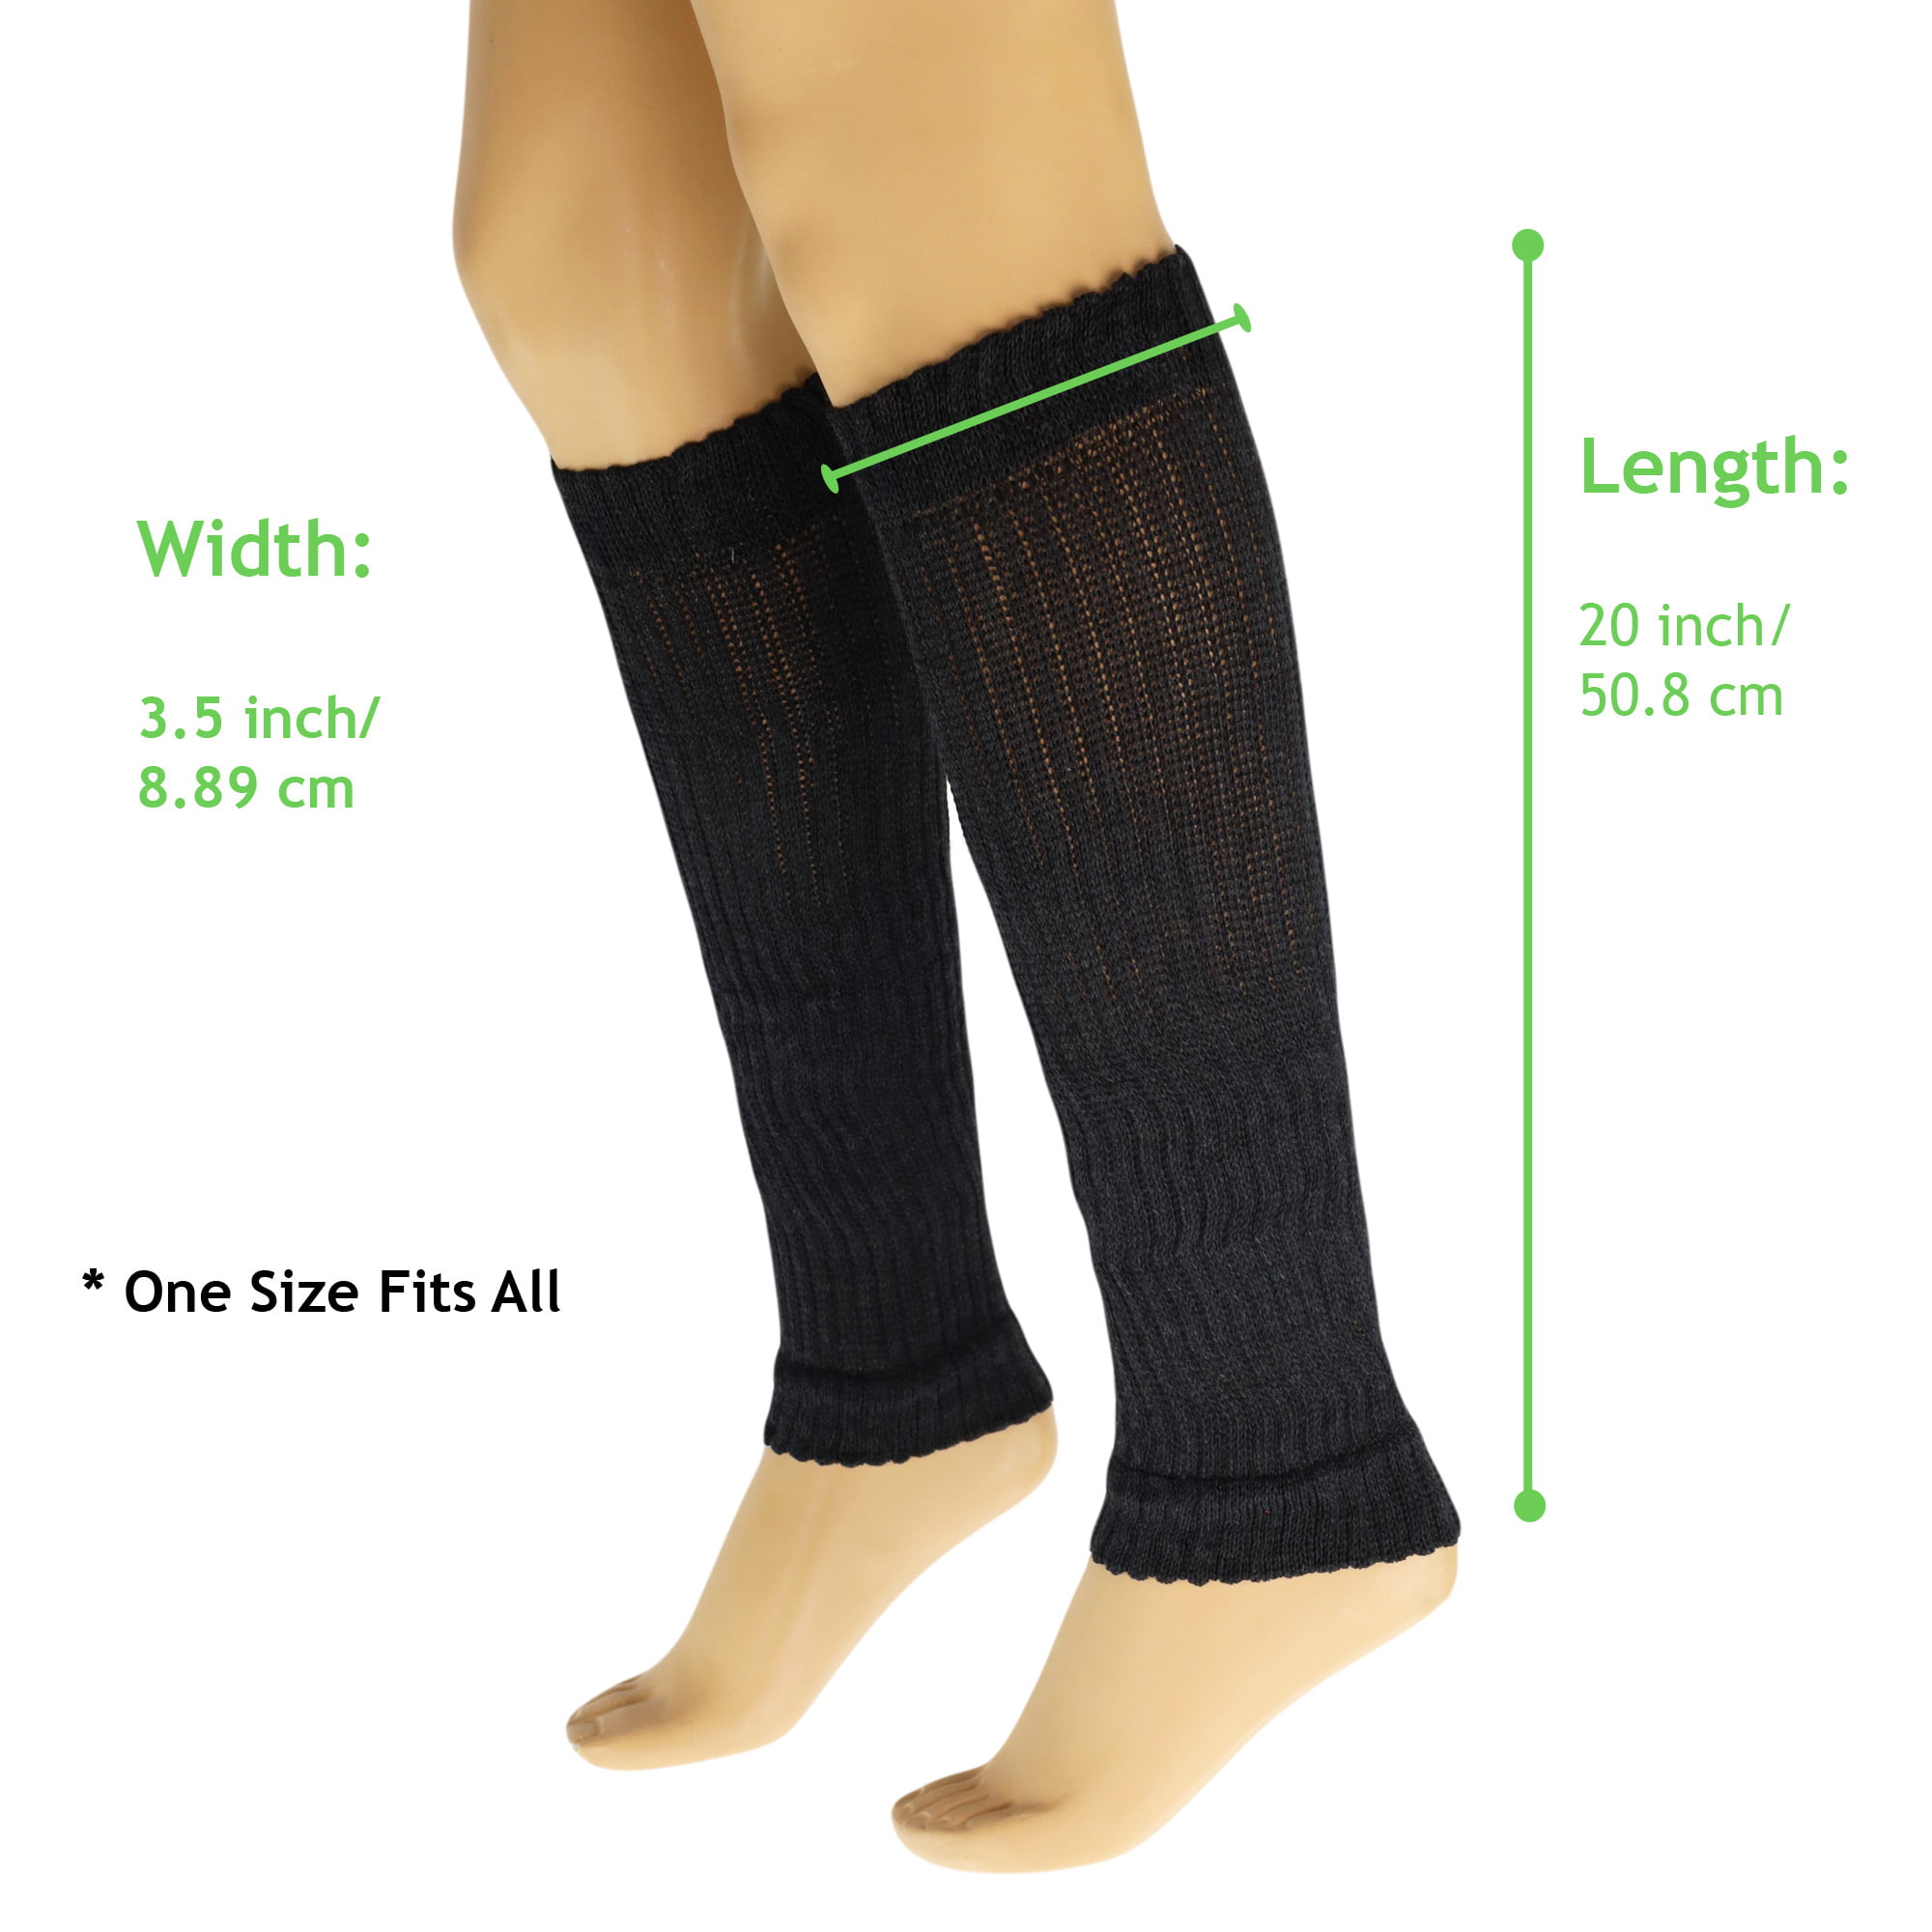 Cotton Leg Warmers for Women Black 1 Pair Knitted Retro